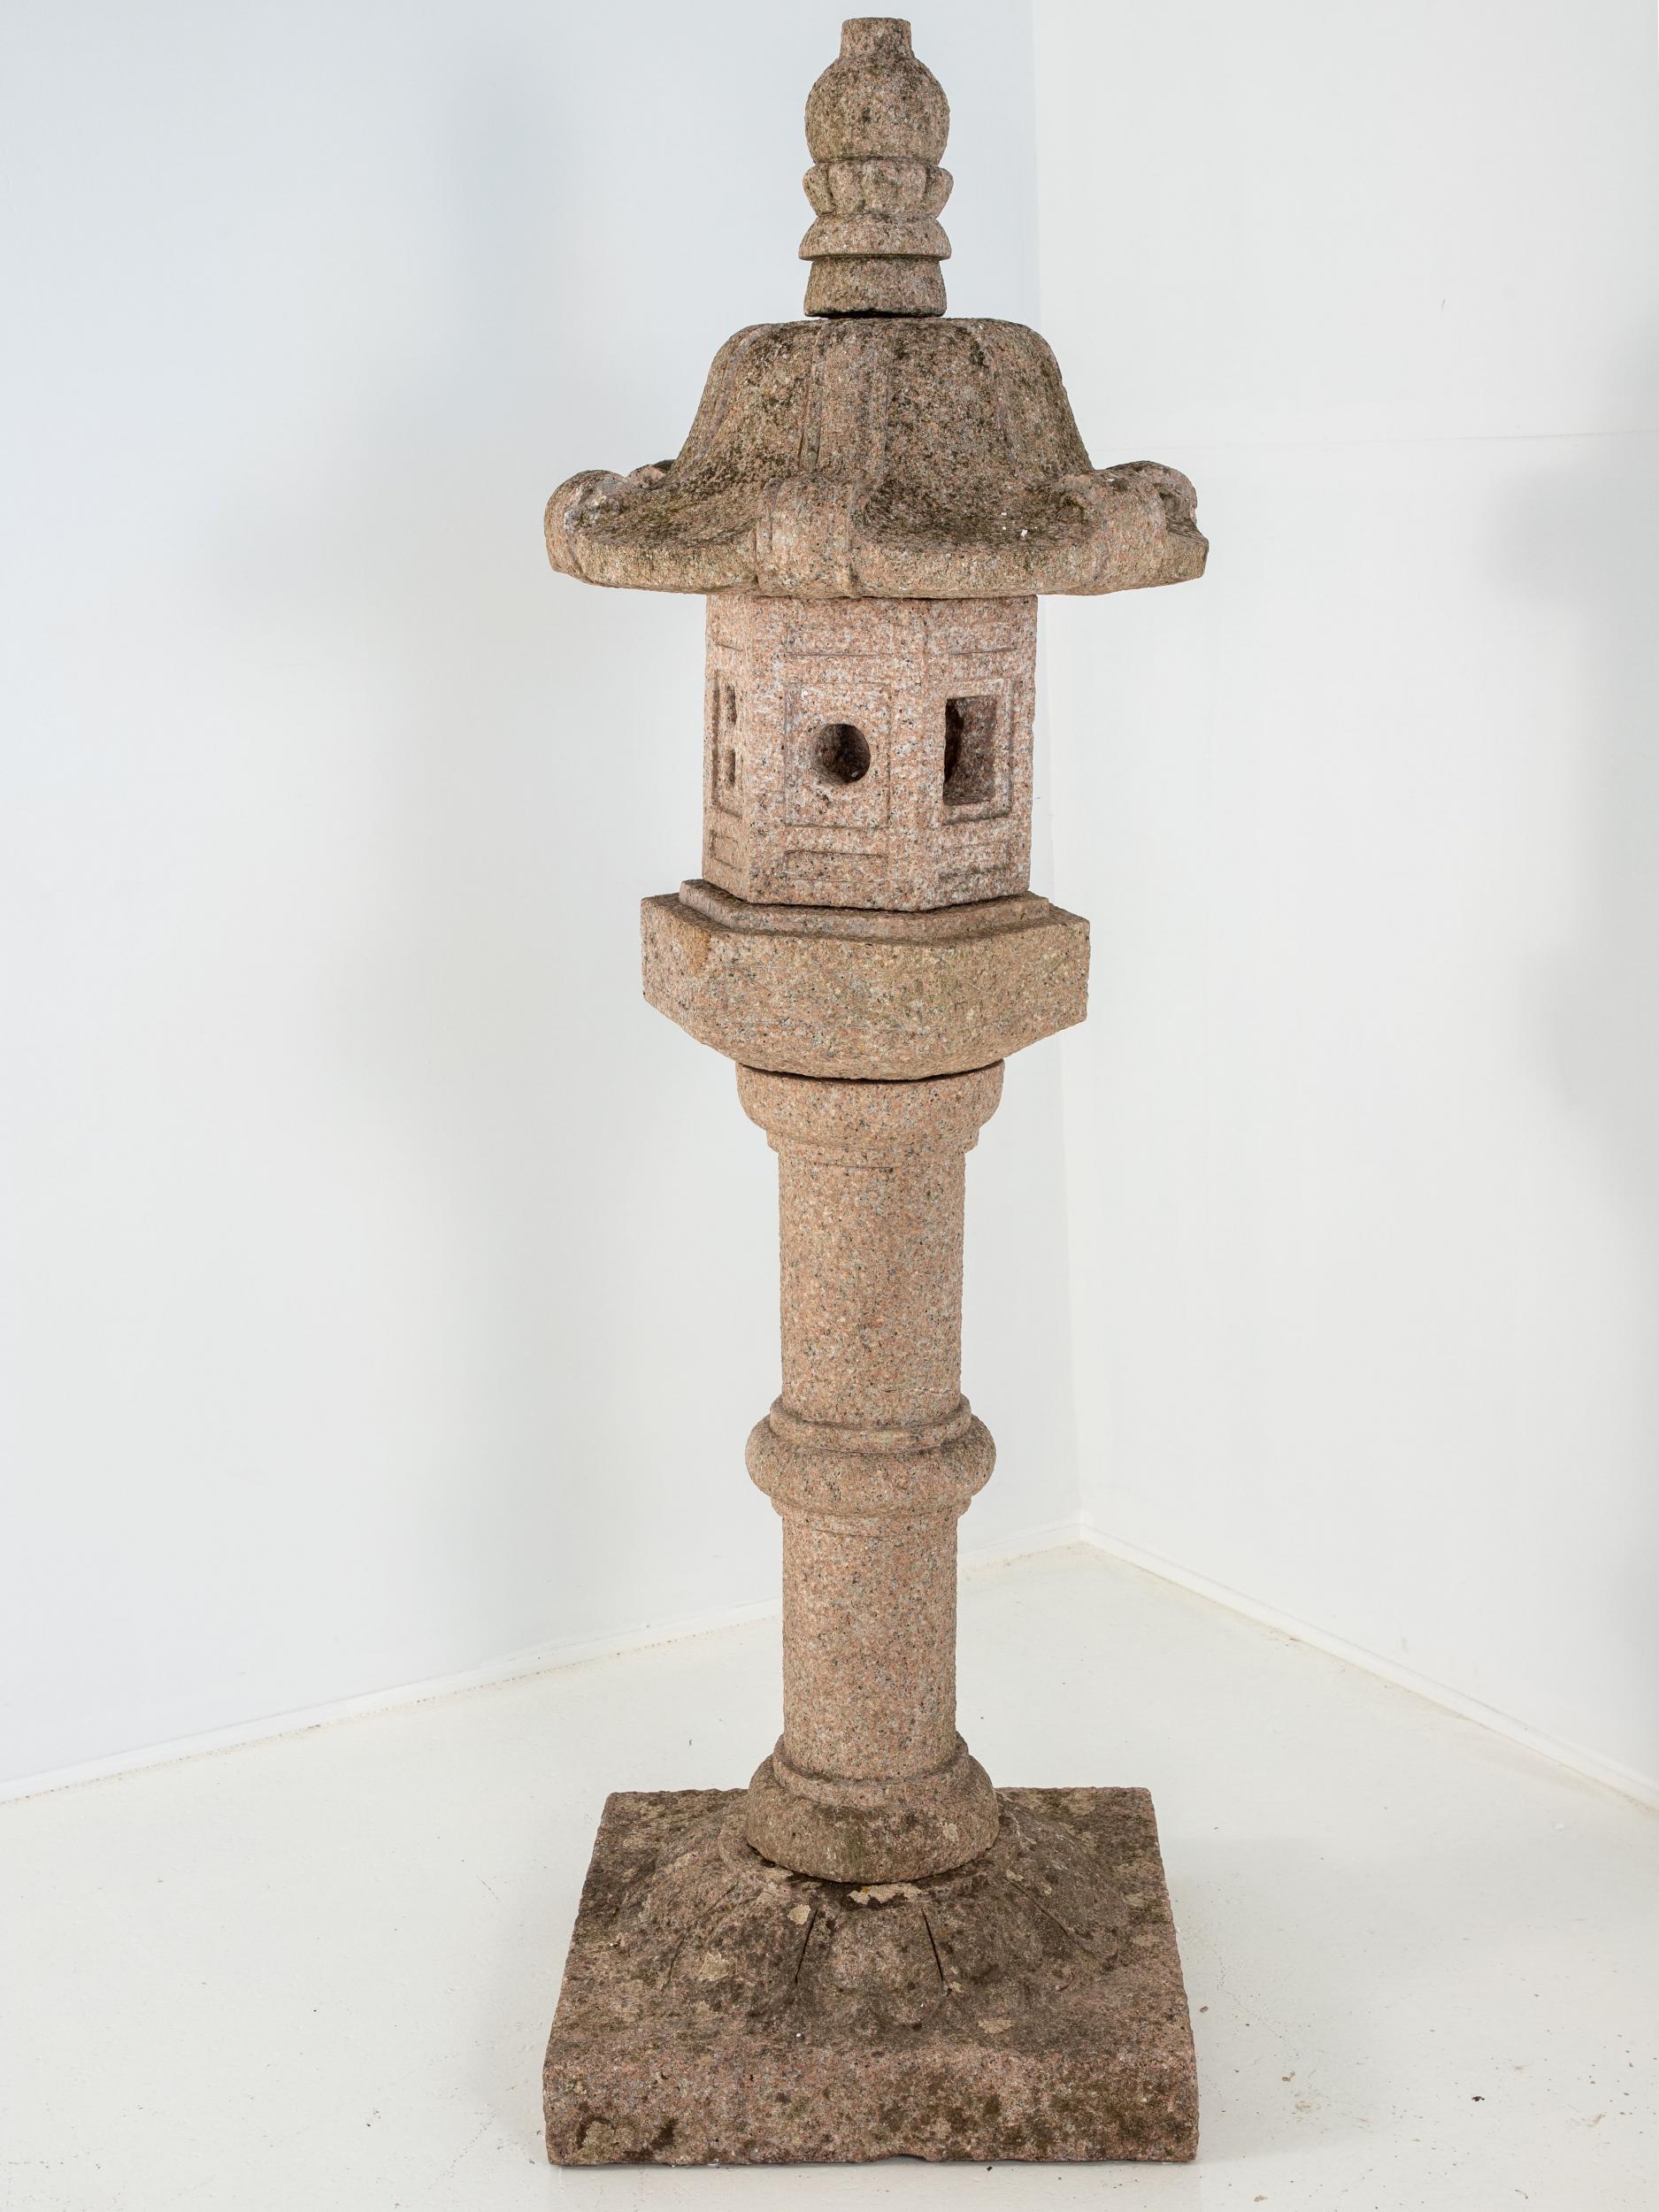 A Japanese style stone pagoda lantern or single dovecote on a pillar from the early 20th century. Constructed of multiple pieces.